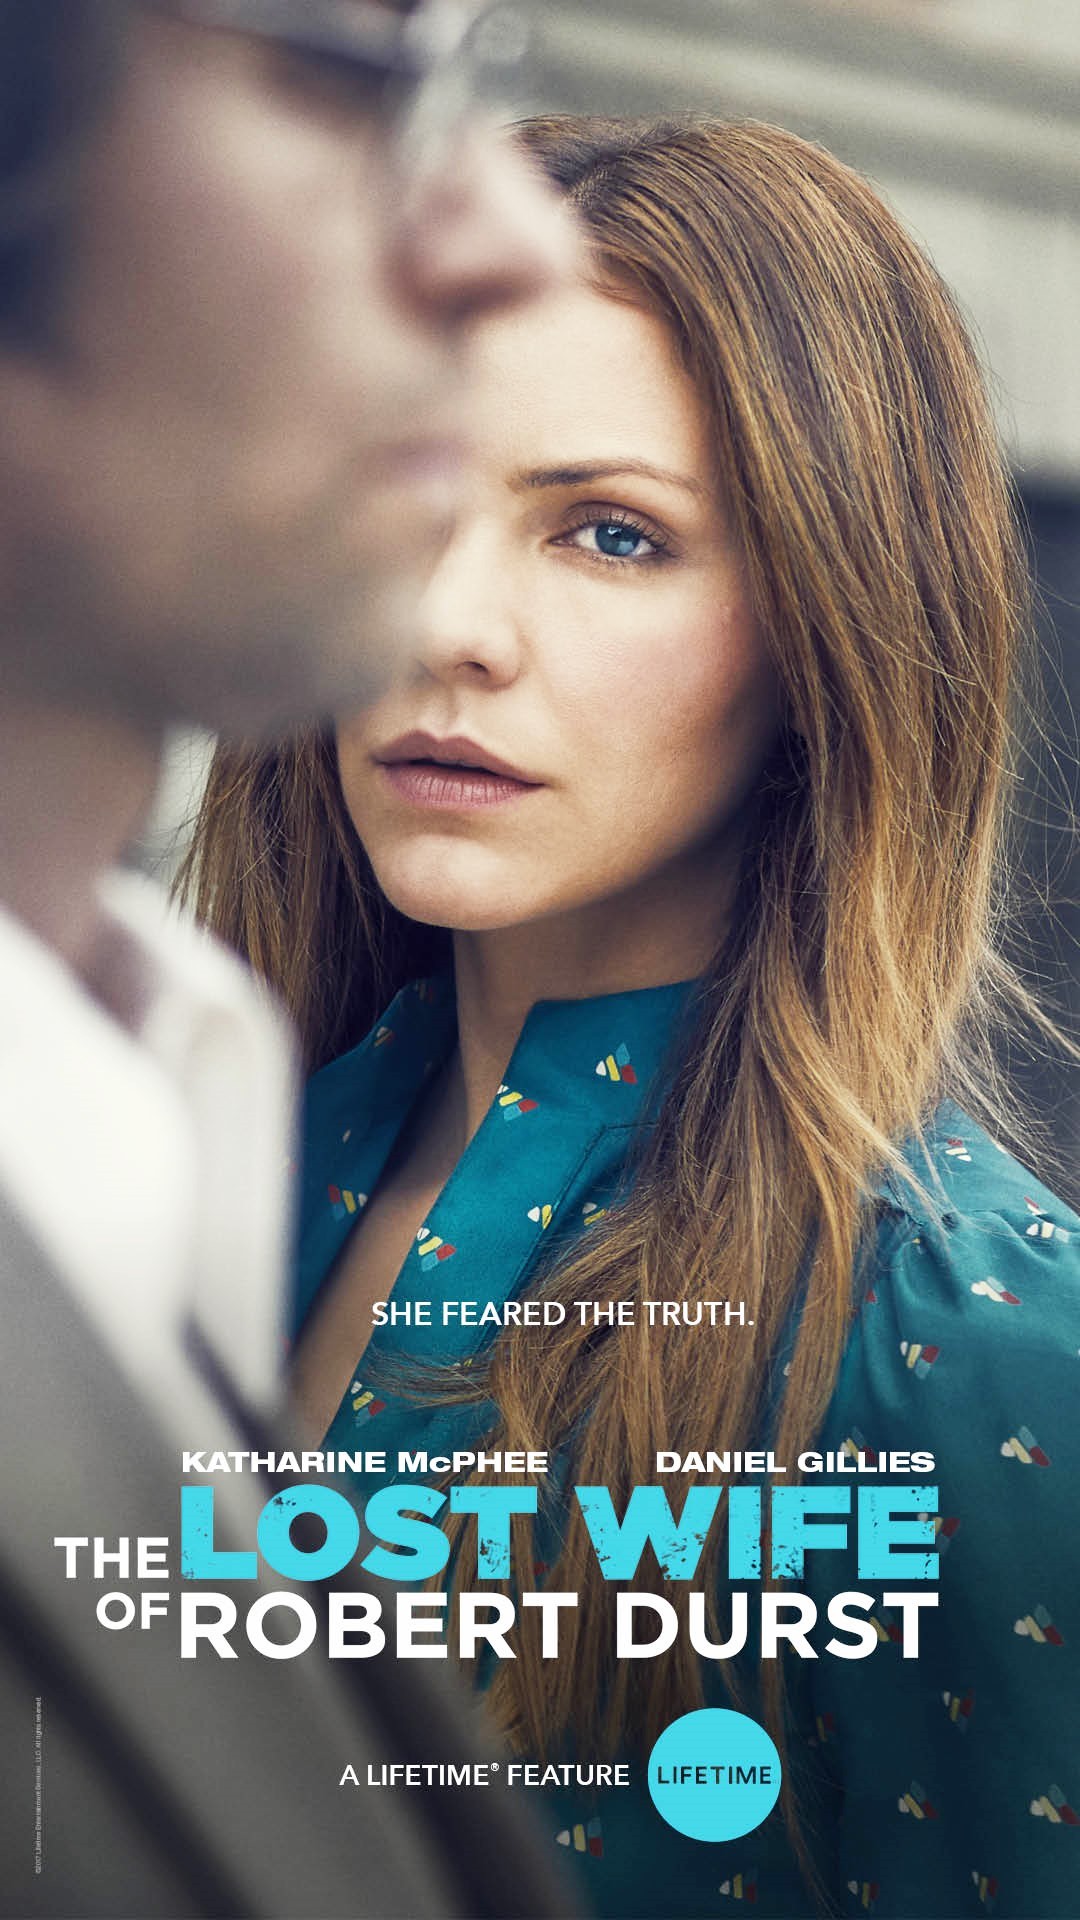 Poster of Lifetime's The Lost Wife of Robert Durst (2017)